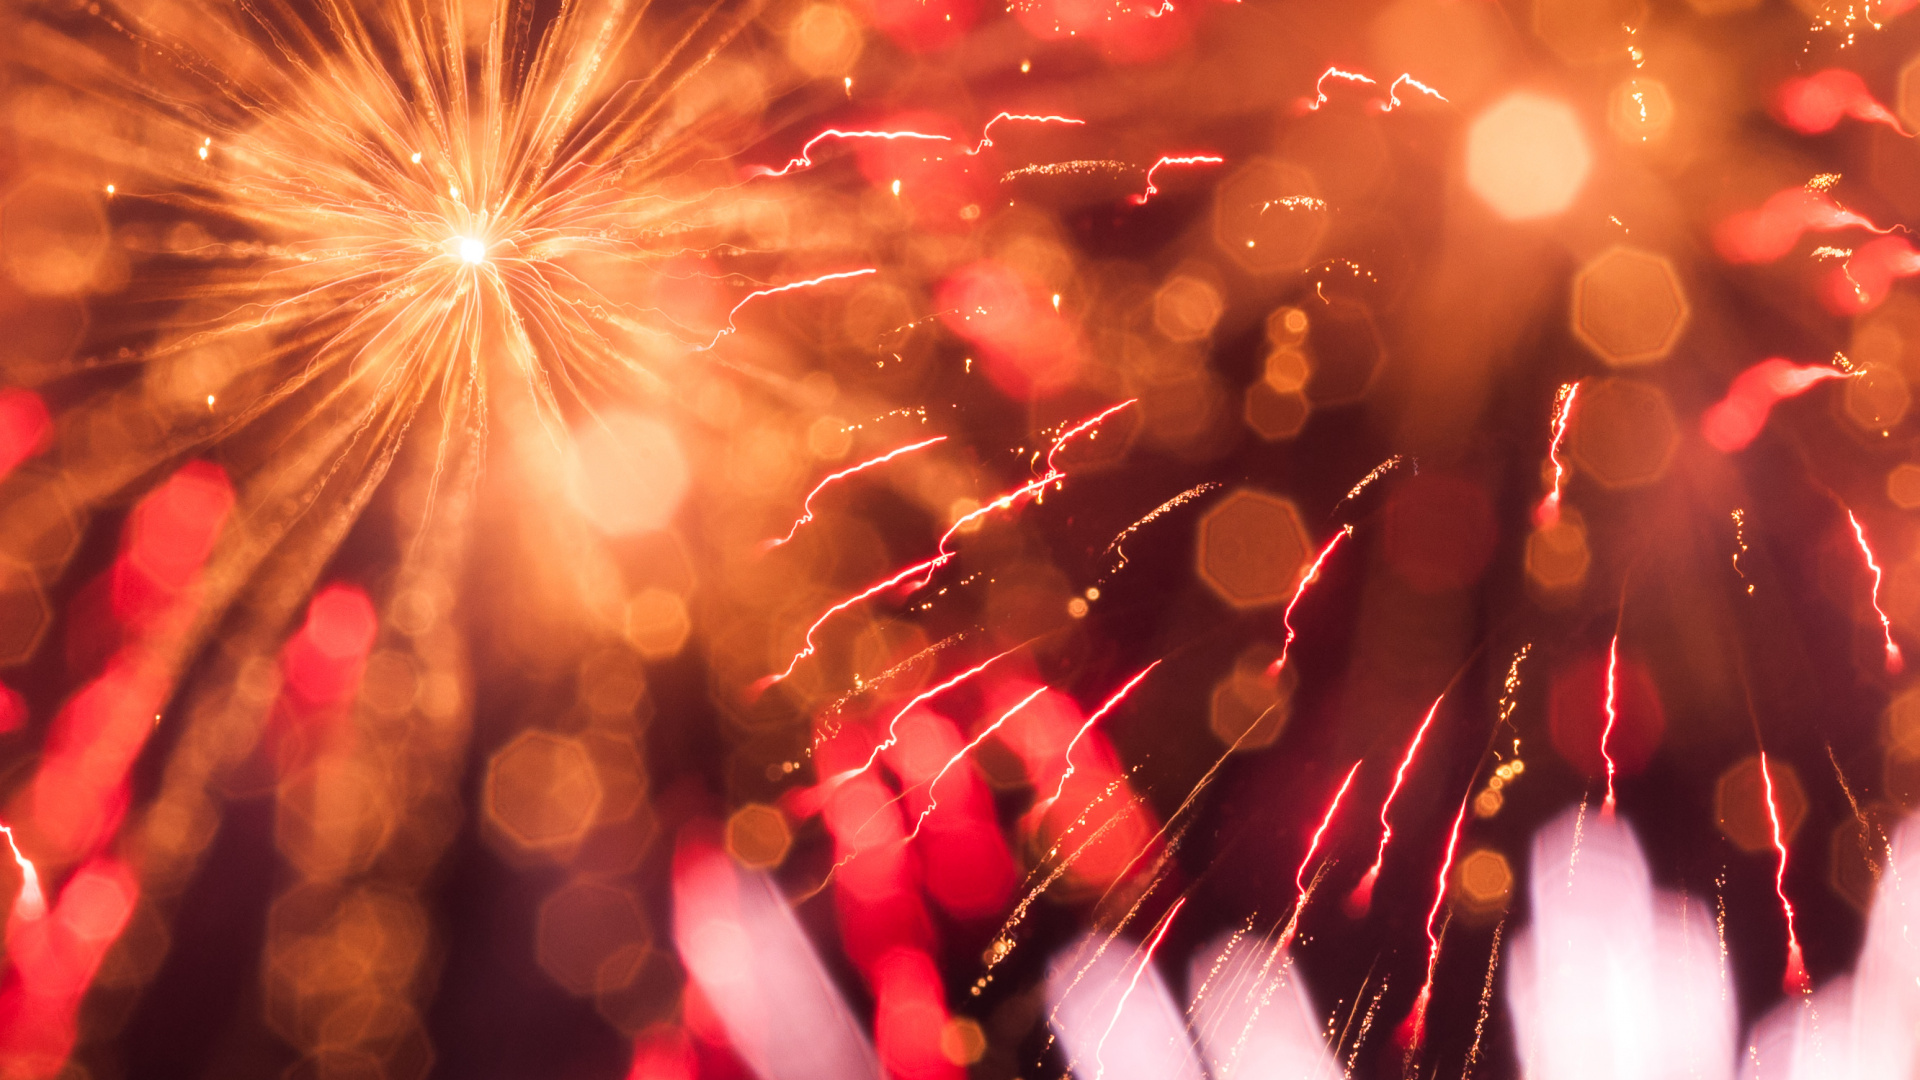 Fireworks, Sparkler, New Years Day, Red, Light. Wallpaper in 1920x1080 Resolution